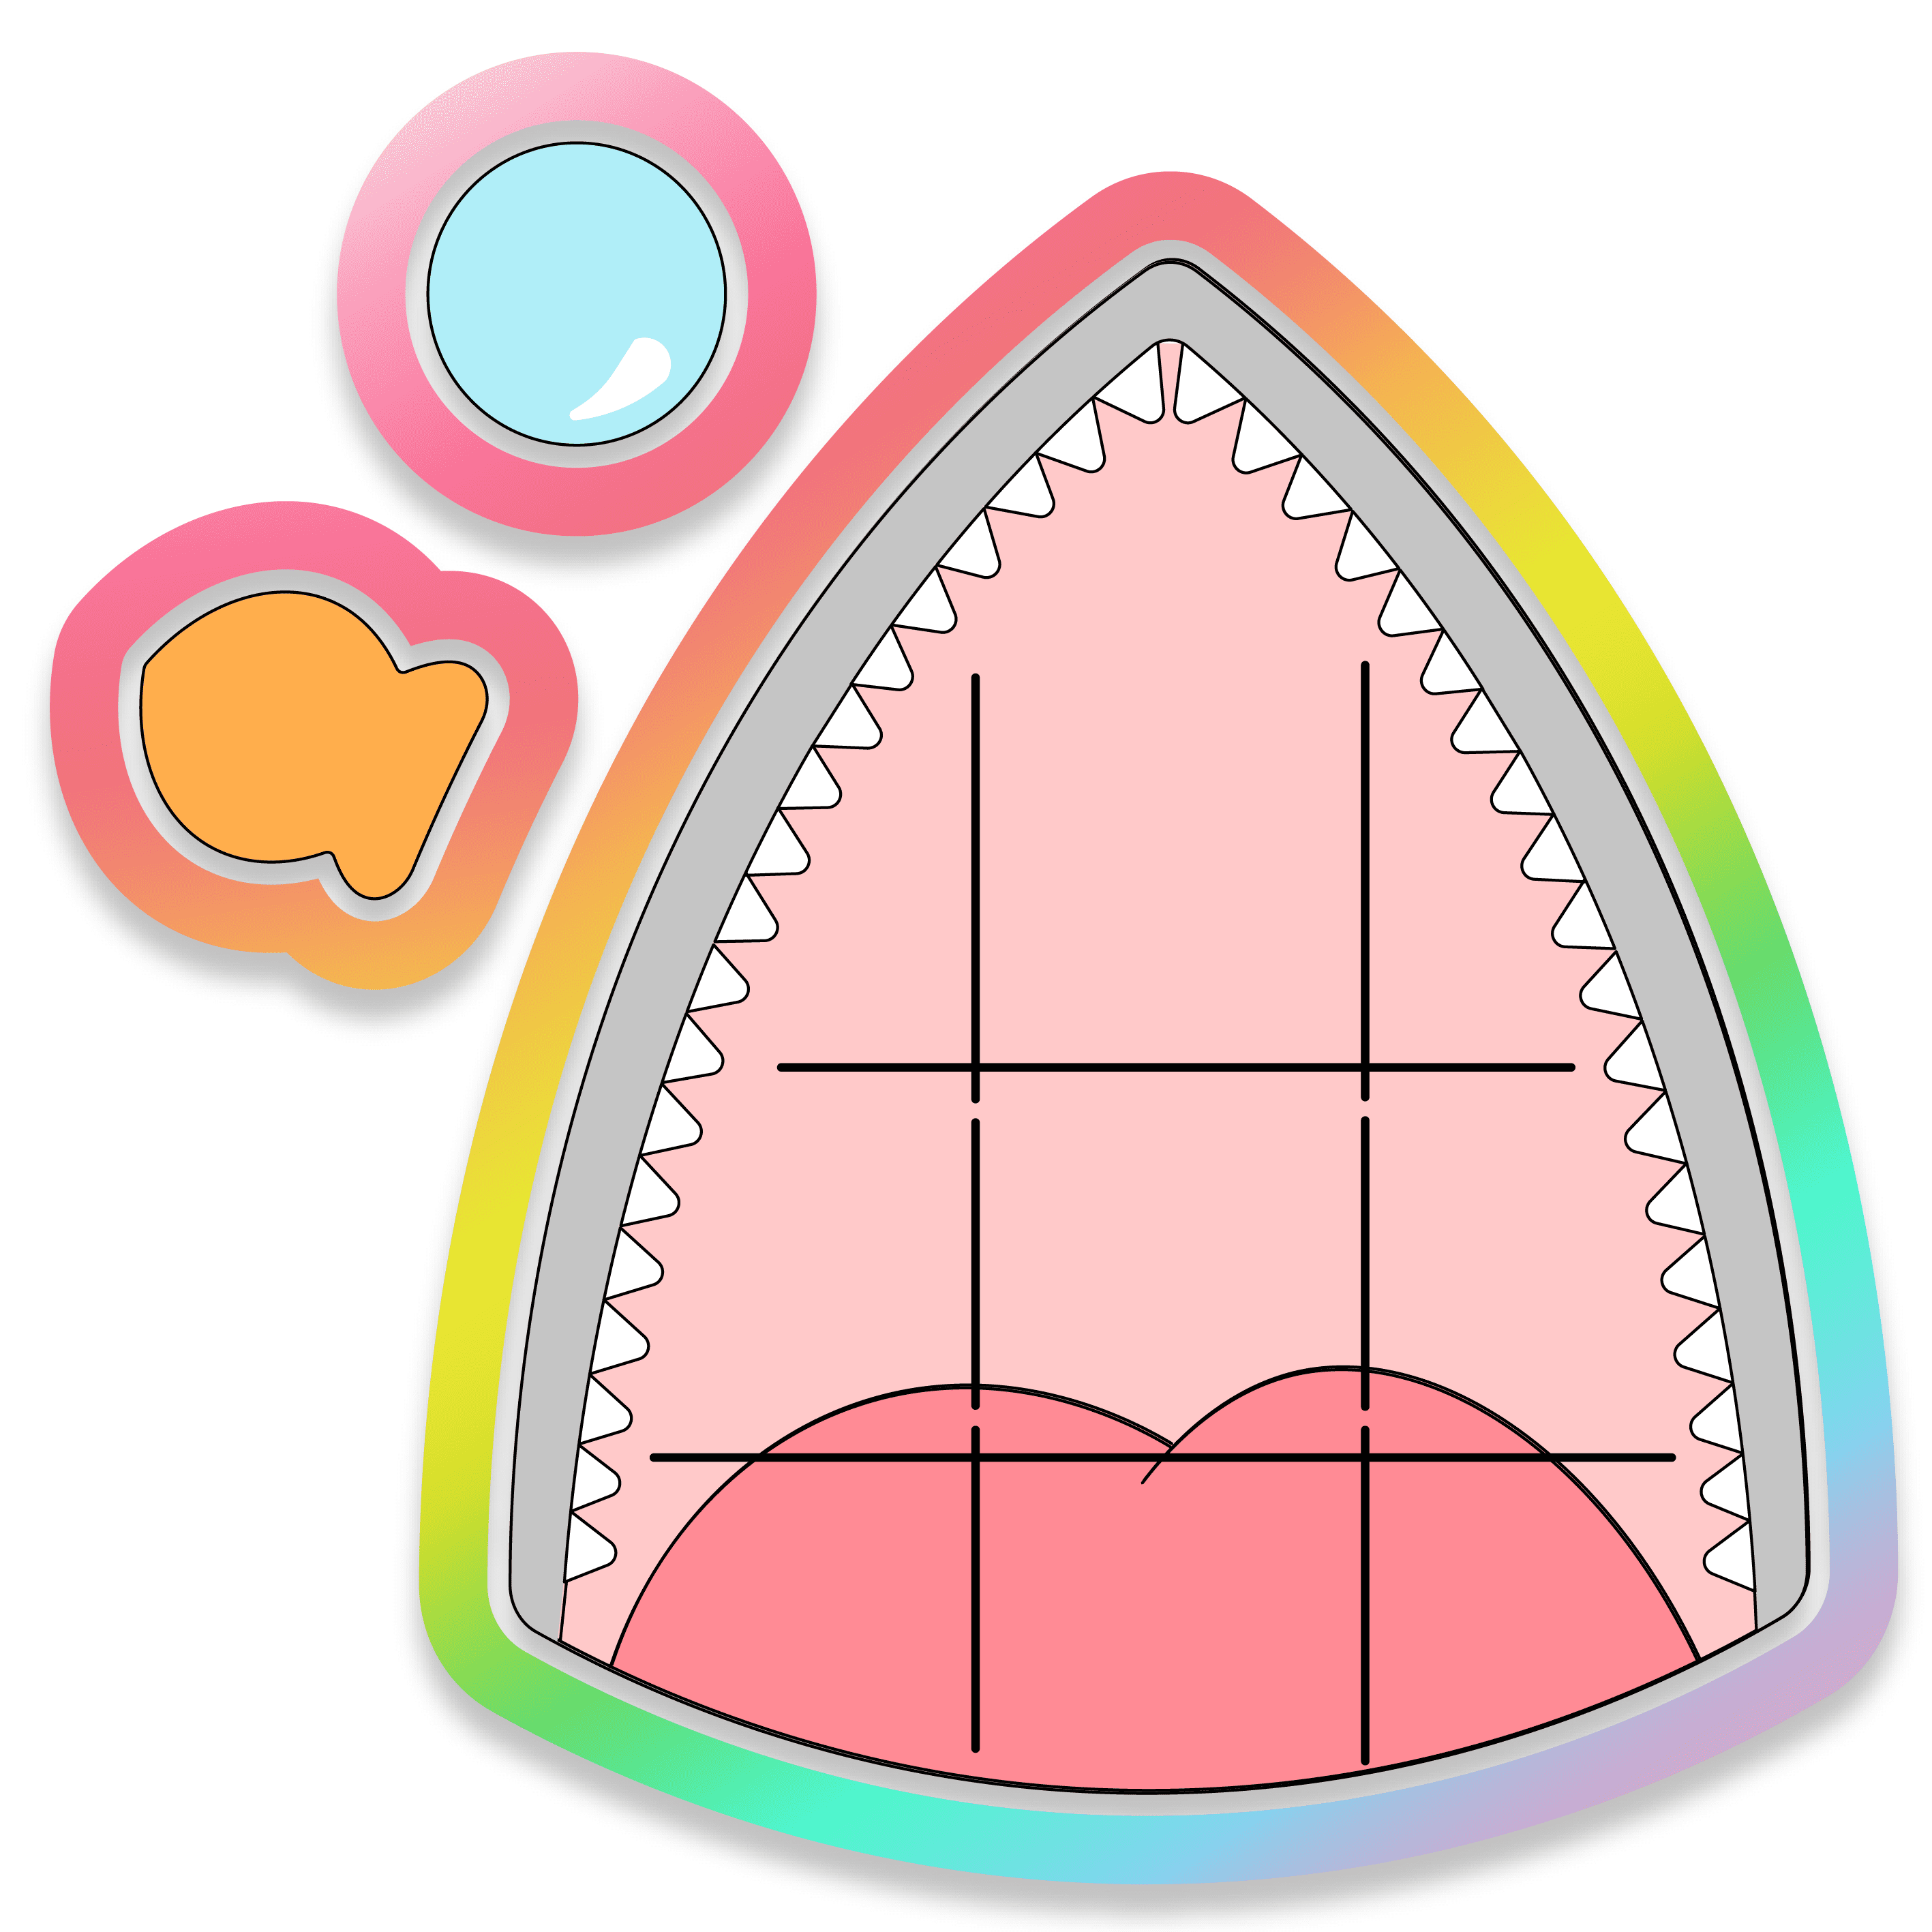 Digital image of a shark mouth cookie cutter tic tac toe set.